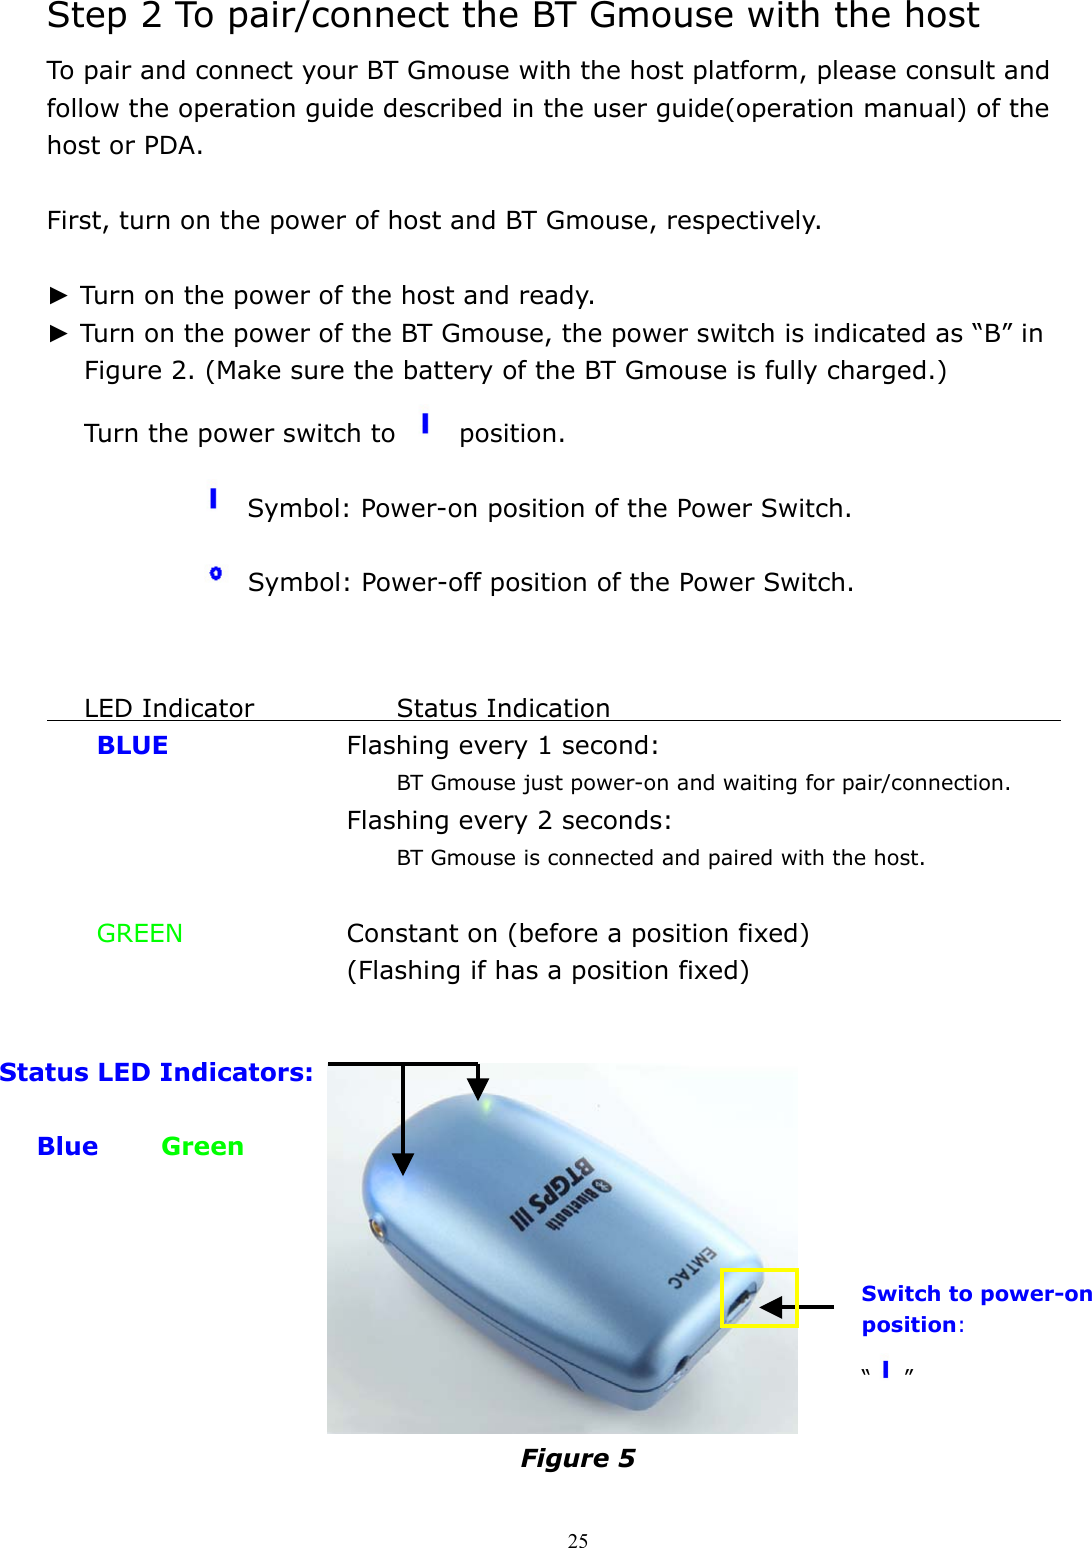  25Step 2 To pair/connect the BT Gmouse with the host To pair and connect your BT Gmouse with the host platform, please consult and follow the operation guide described in the user guide(operation manual) of the host or PDA.  First, turn on the power of host and BT Gmouse, respectively.  ► Turn on the power of the host and ready. ► Turn on the power of the BT Gmouse, the power switch is indicated as “B” in Figure 2. (Make sure the battery of the BT Gmouse is fully charged.)       Turn the power switch to   position.          Symbol: Power-on position of the Power Switch.          Symbol: Power-off position of the Power Switch.        LED Indicator        Status Indication                                      BLUE    Flashing every 1 second: BT Gmouse just power-on and waiting for pair/connection.       Flashing every 2 seconds: BT Gmouse is connected and paired with the host.   GREEN        Constant on (before a position fixed)       (Flashing if has a position fixed)             Figure 5  Switch to power-on position: “”   Status LED Indicators:               Blue     Green   